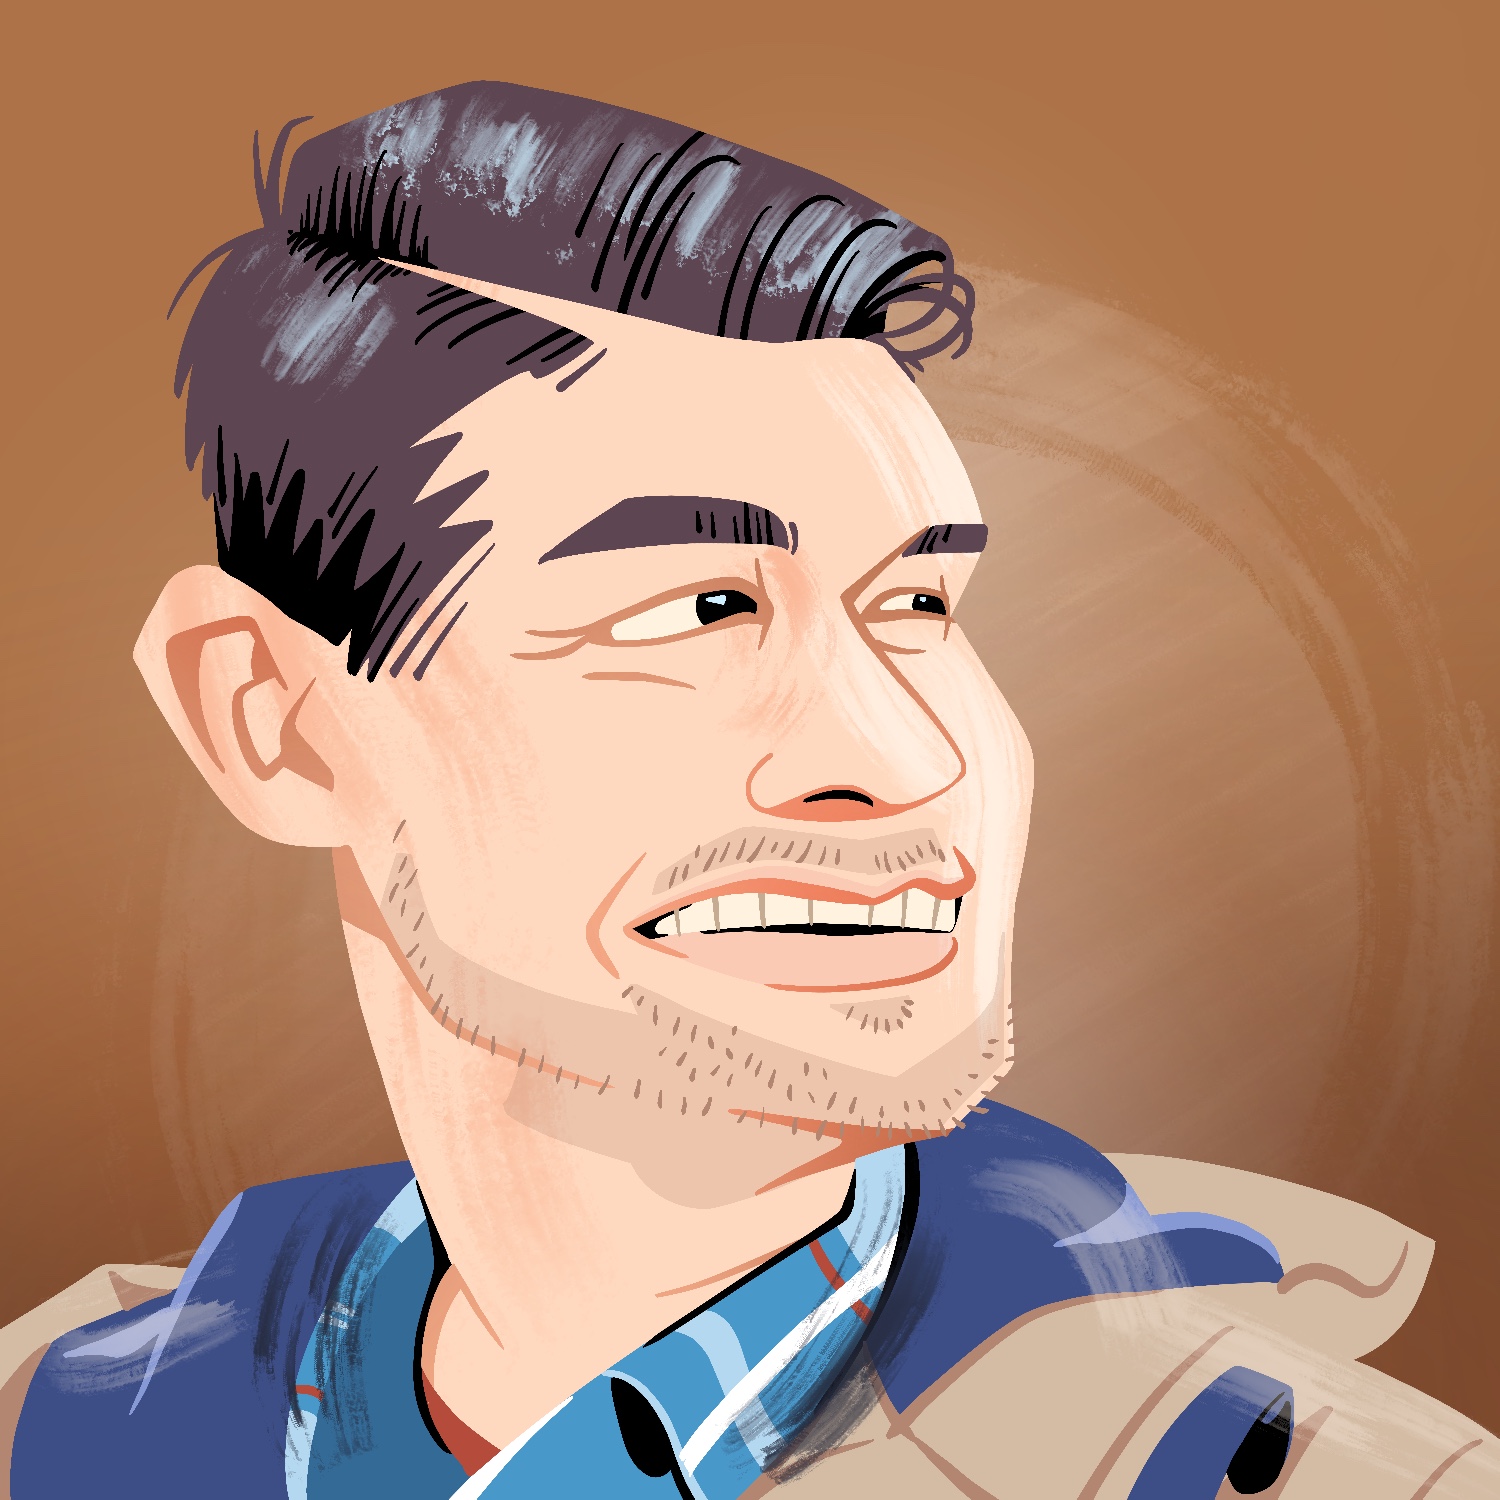 An illustration of a man looking to the right. He has a pale complexion, dark eyes, short dark hair that's parted on the side and oiled down, and a stubbled mustache, beard, and goatee. He is smiling slightly, and his face has been stylized like a caricature. He is wearing layers including a blue plaid shirt and tan coat. The background is a warm brown.